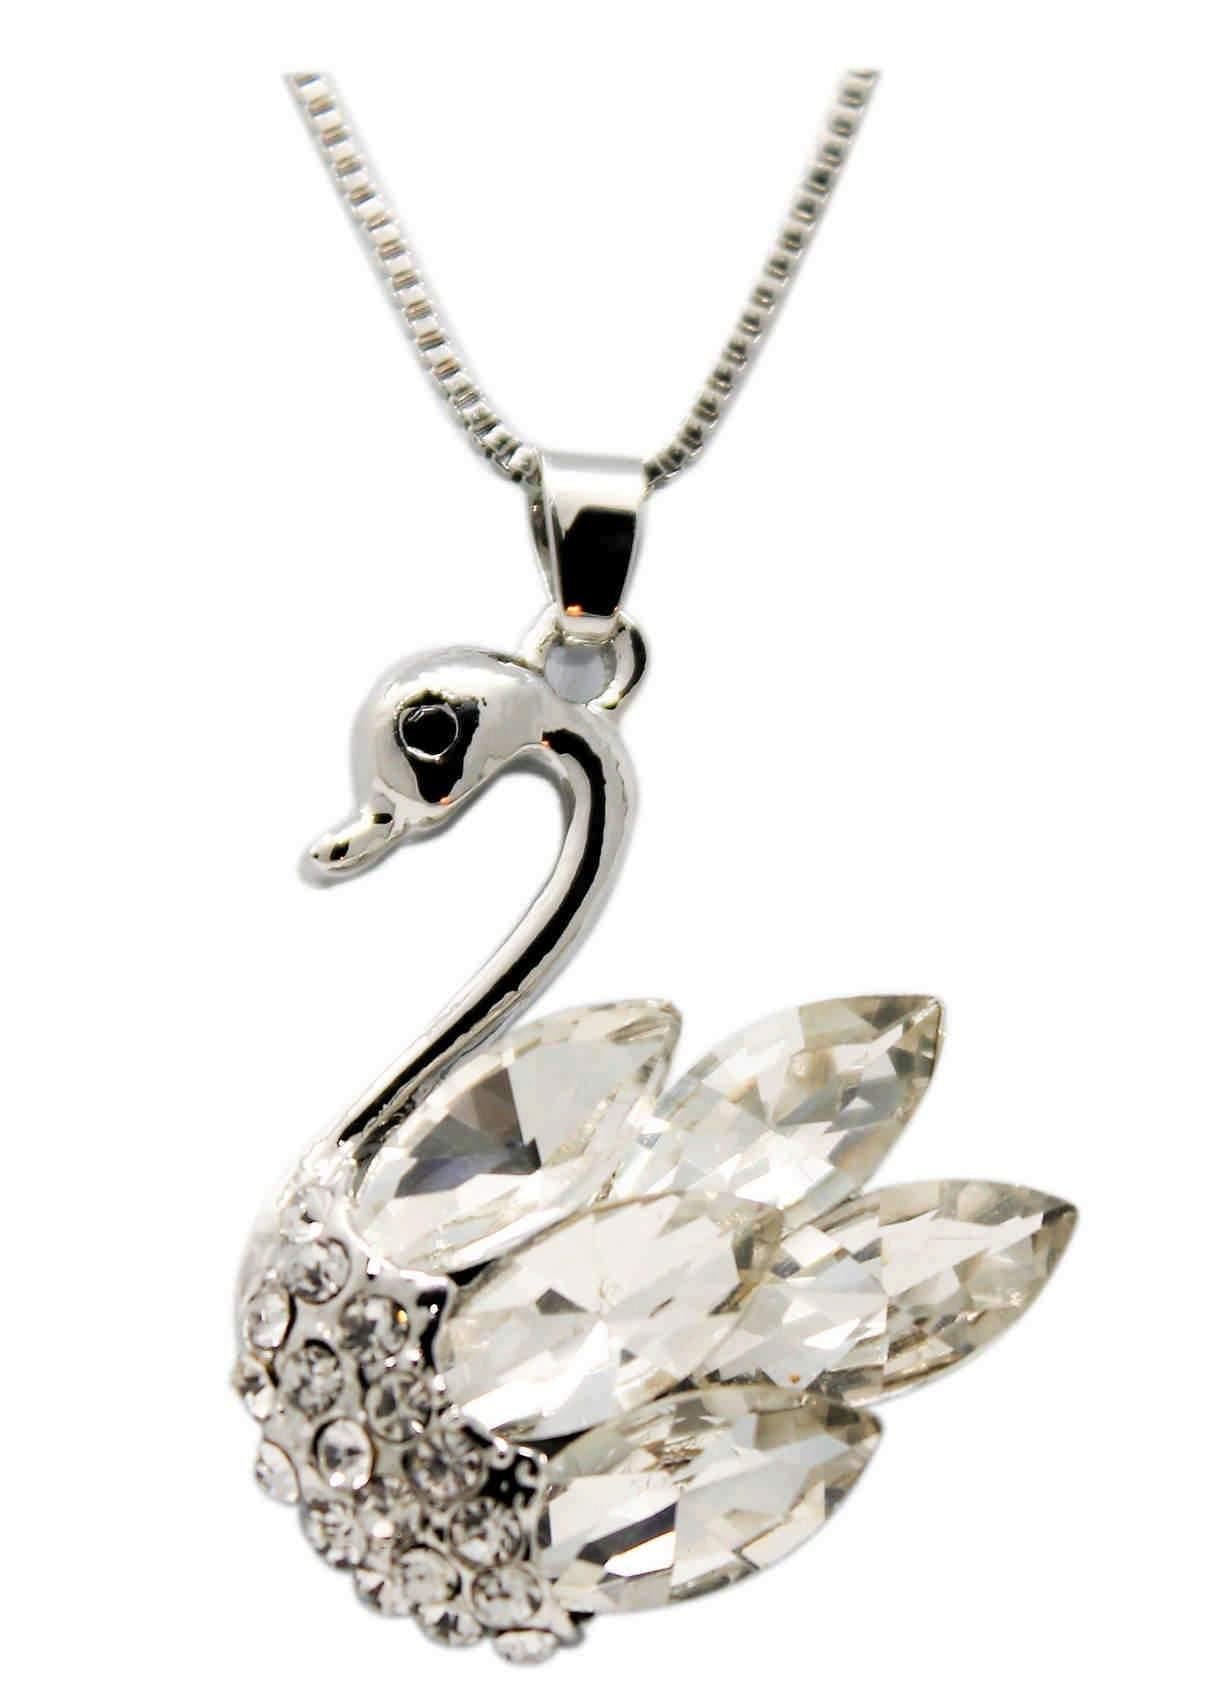 Rhinestones Studded Duck Design Imitation Fashion Metal Double Pendant with Long Chain for Girls